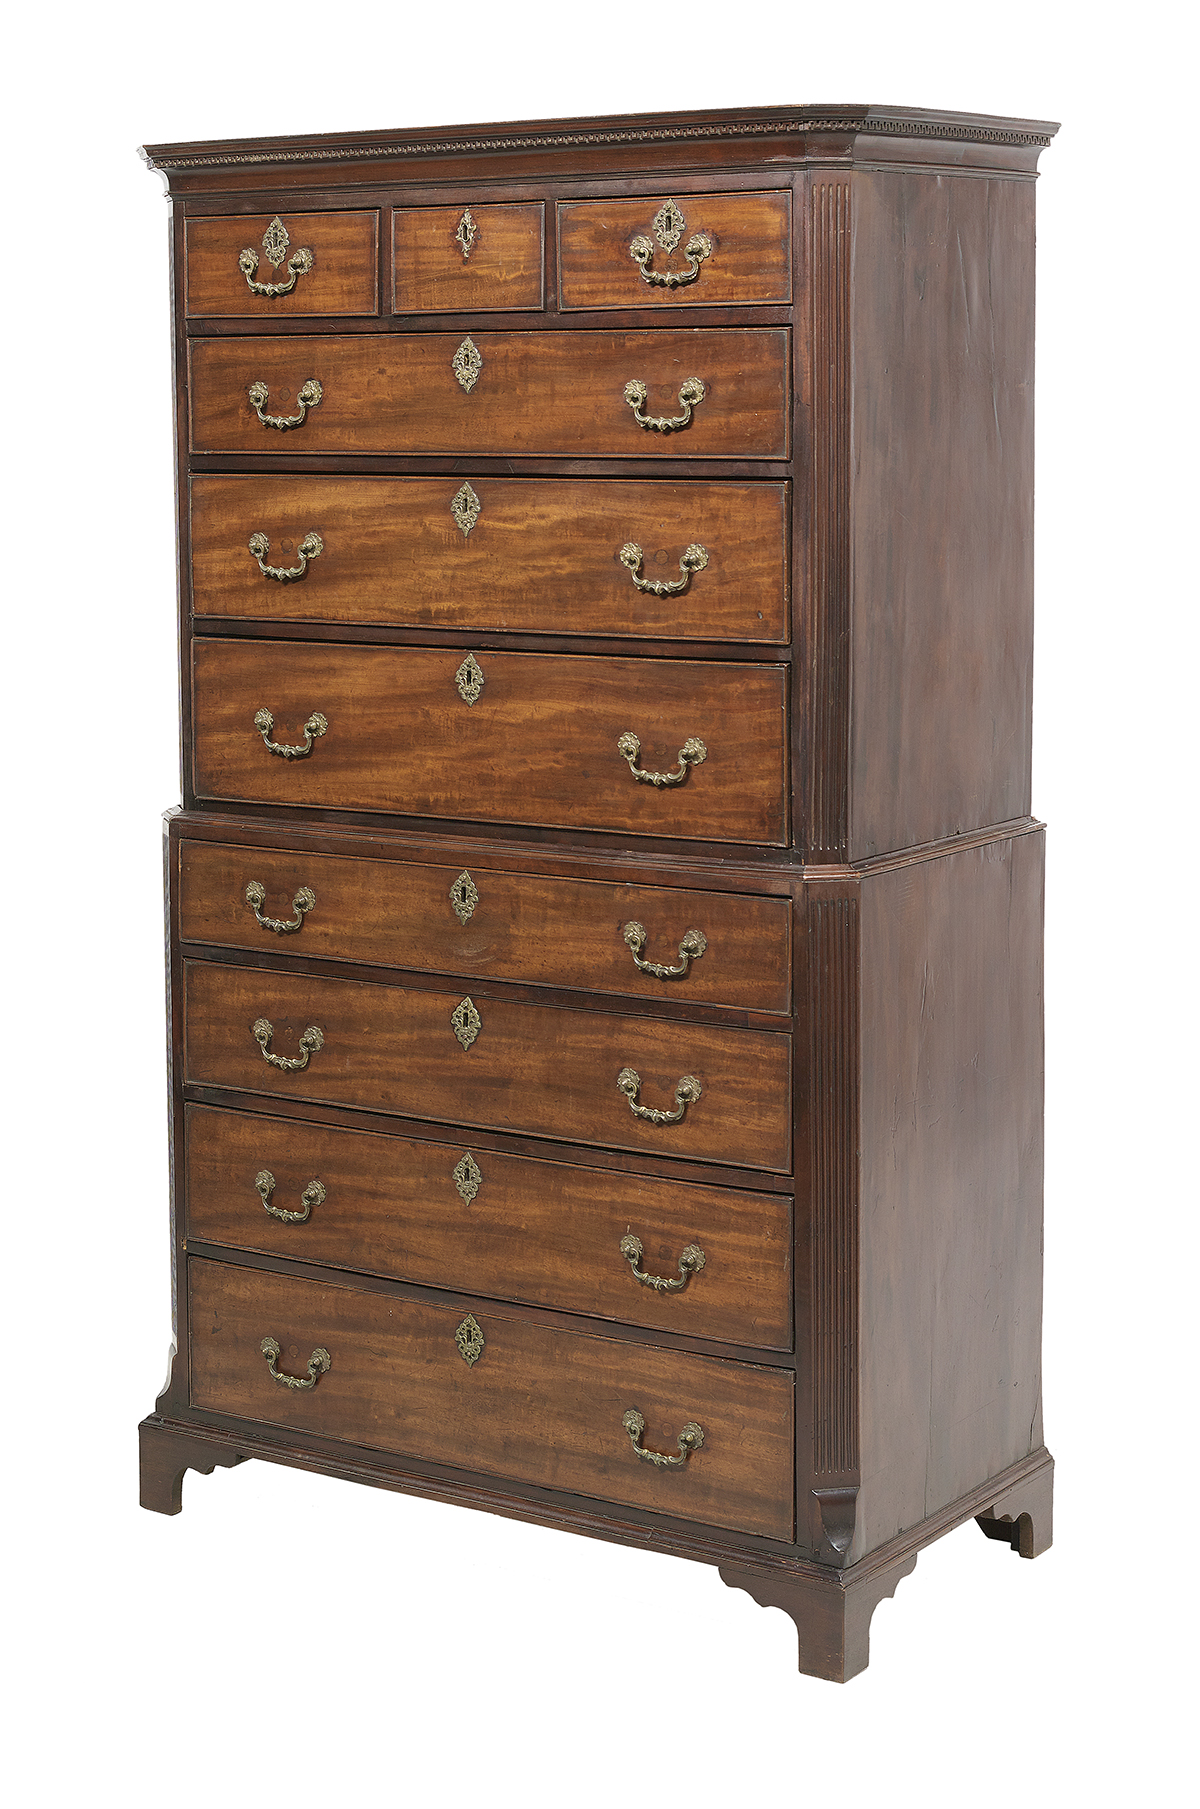 George III Mahogany Chest-on-Chest - Image 2 of 3